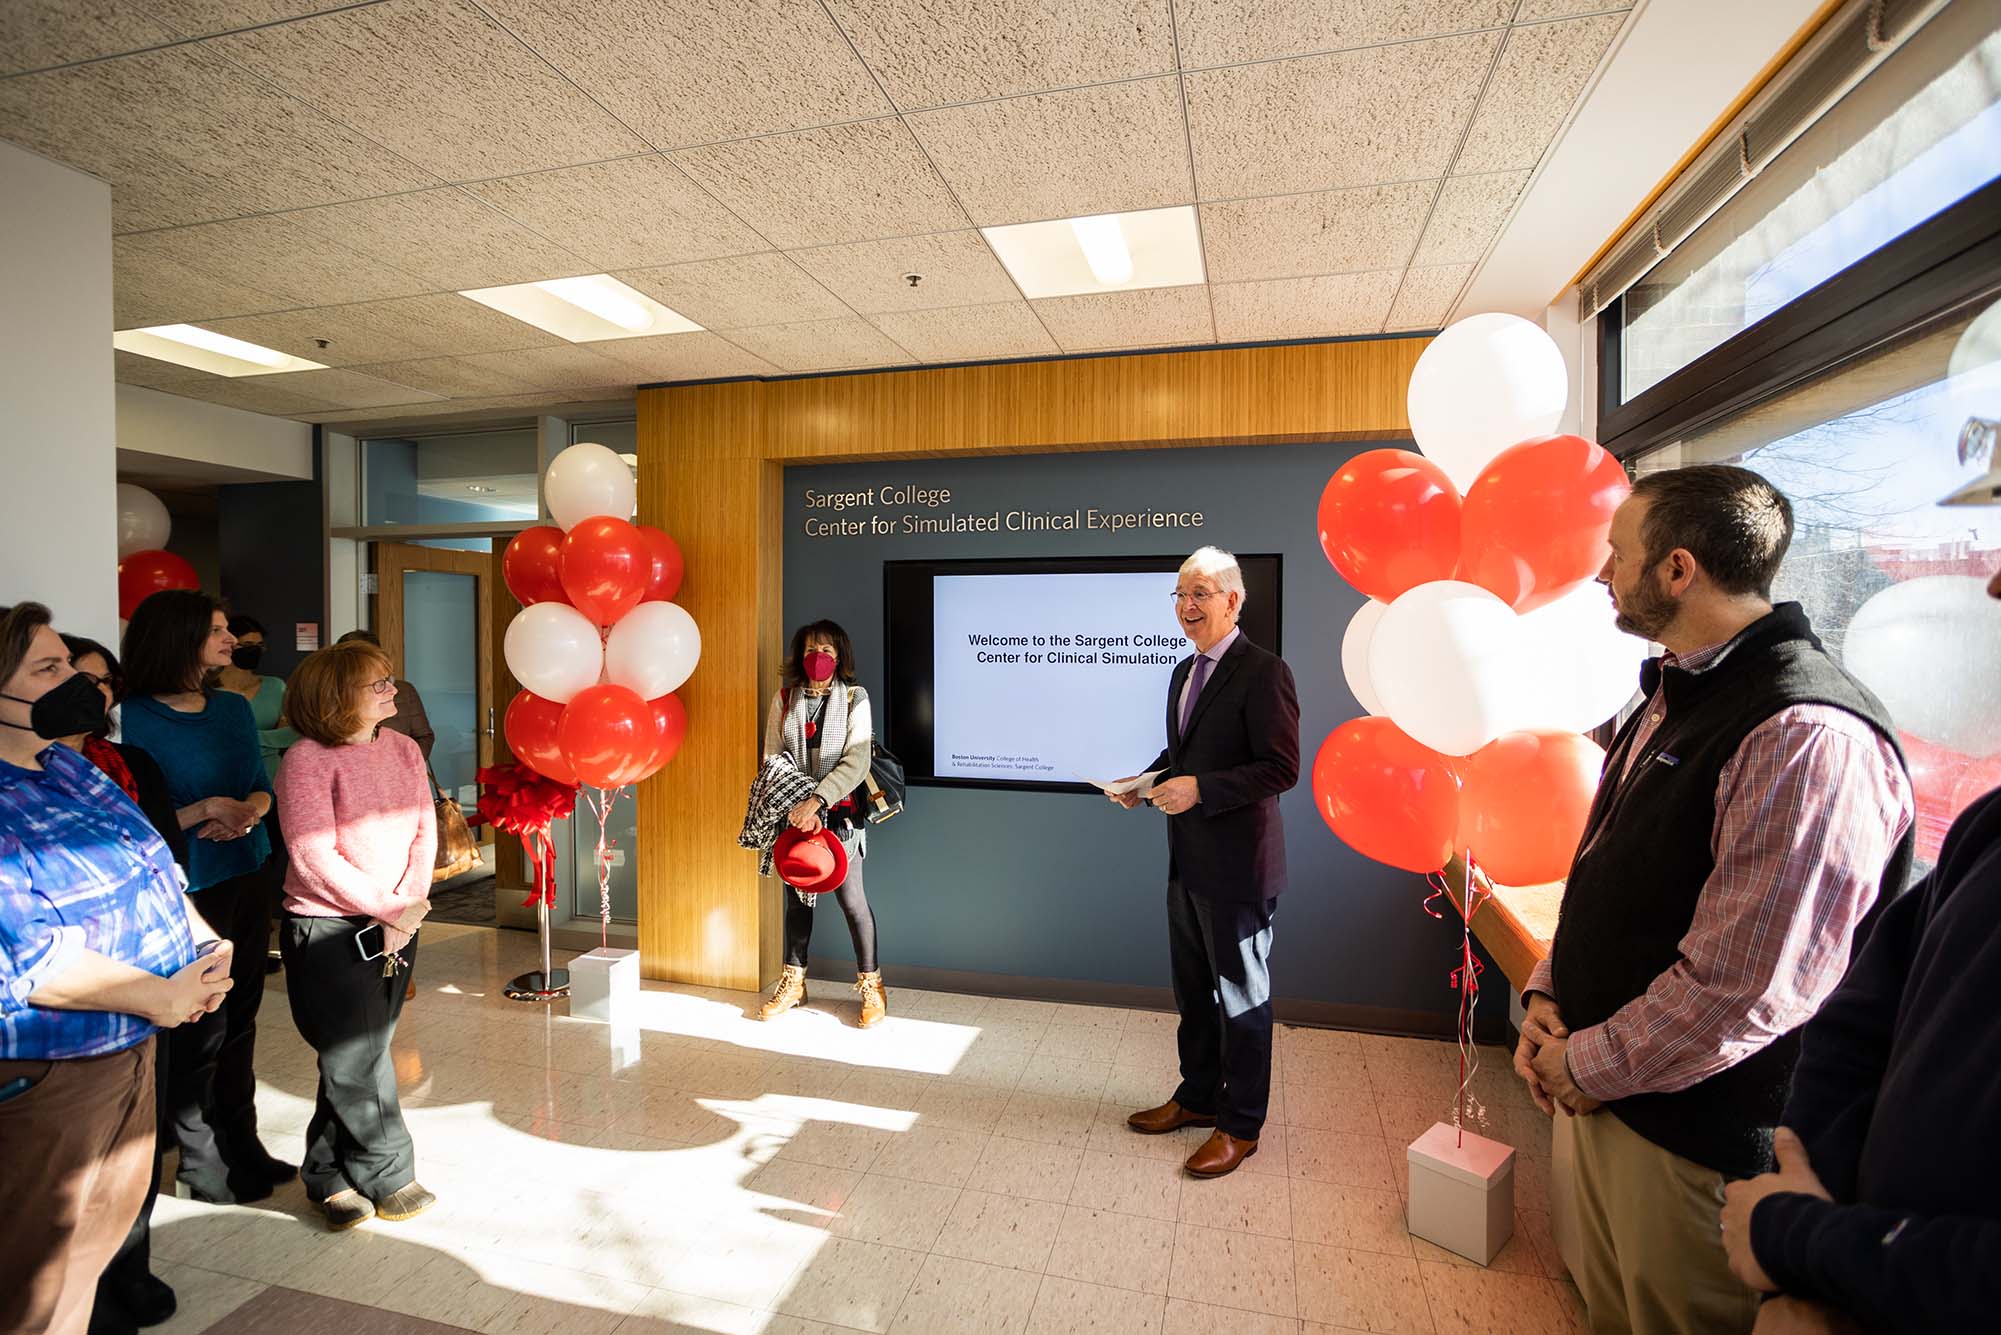 Photo: Sargent College Dean Chris Moore (center) stands in a room filled with red and white balloons to celebrate the opening of the new clinical simulation rooms. He stands in front of a dark blue wall with silver letters that read "Sargent College Center for Clinical Simulation" as well as a tv screen showing a white slide that reads the same. A small group of people stand on either side of him as they look on as he smiles and speaks.